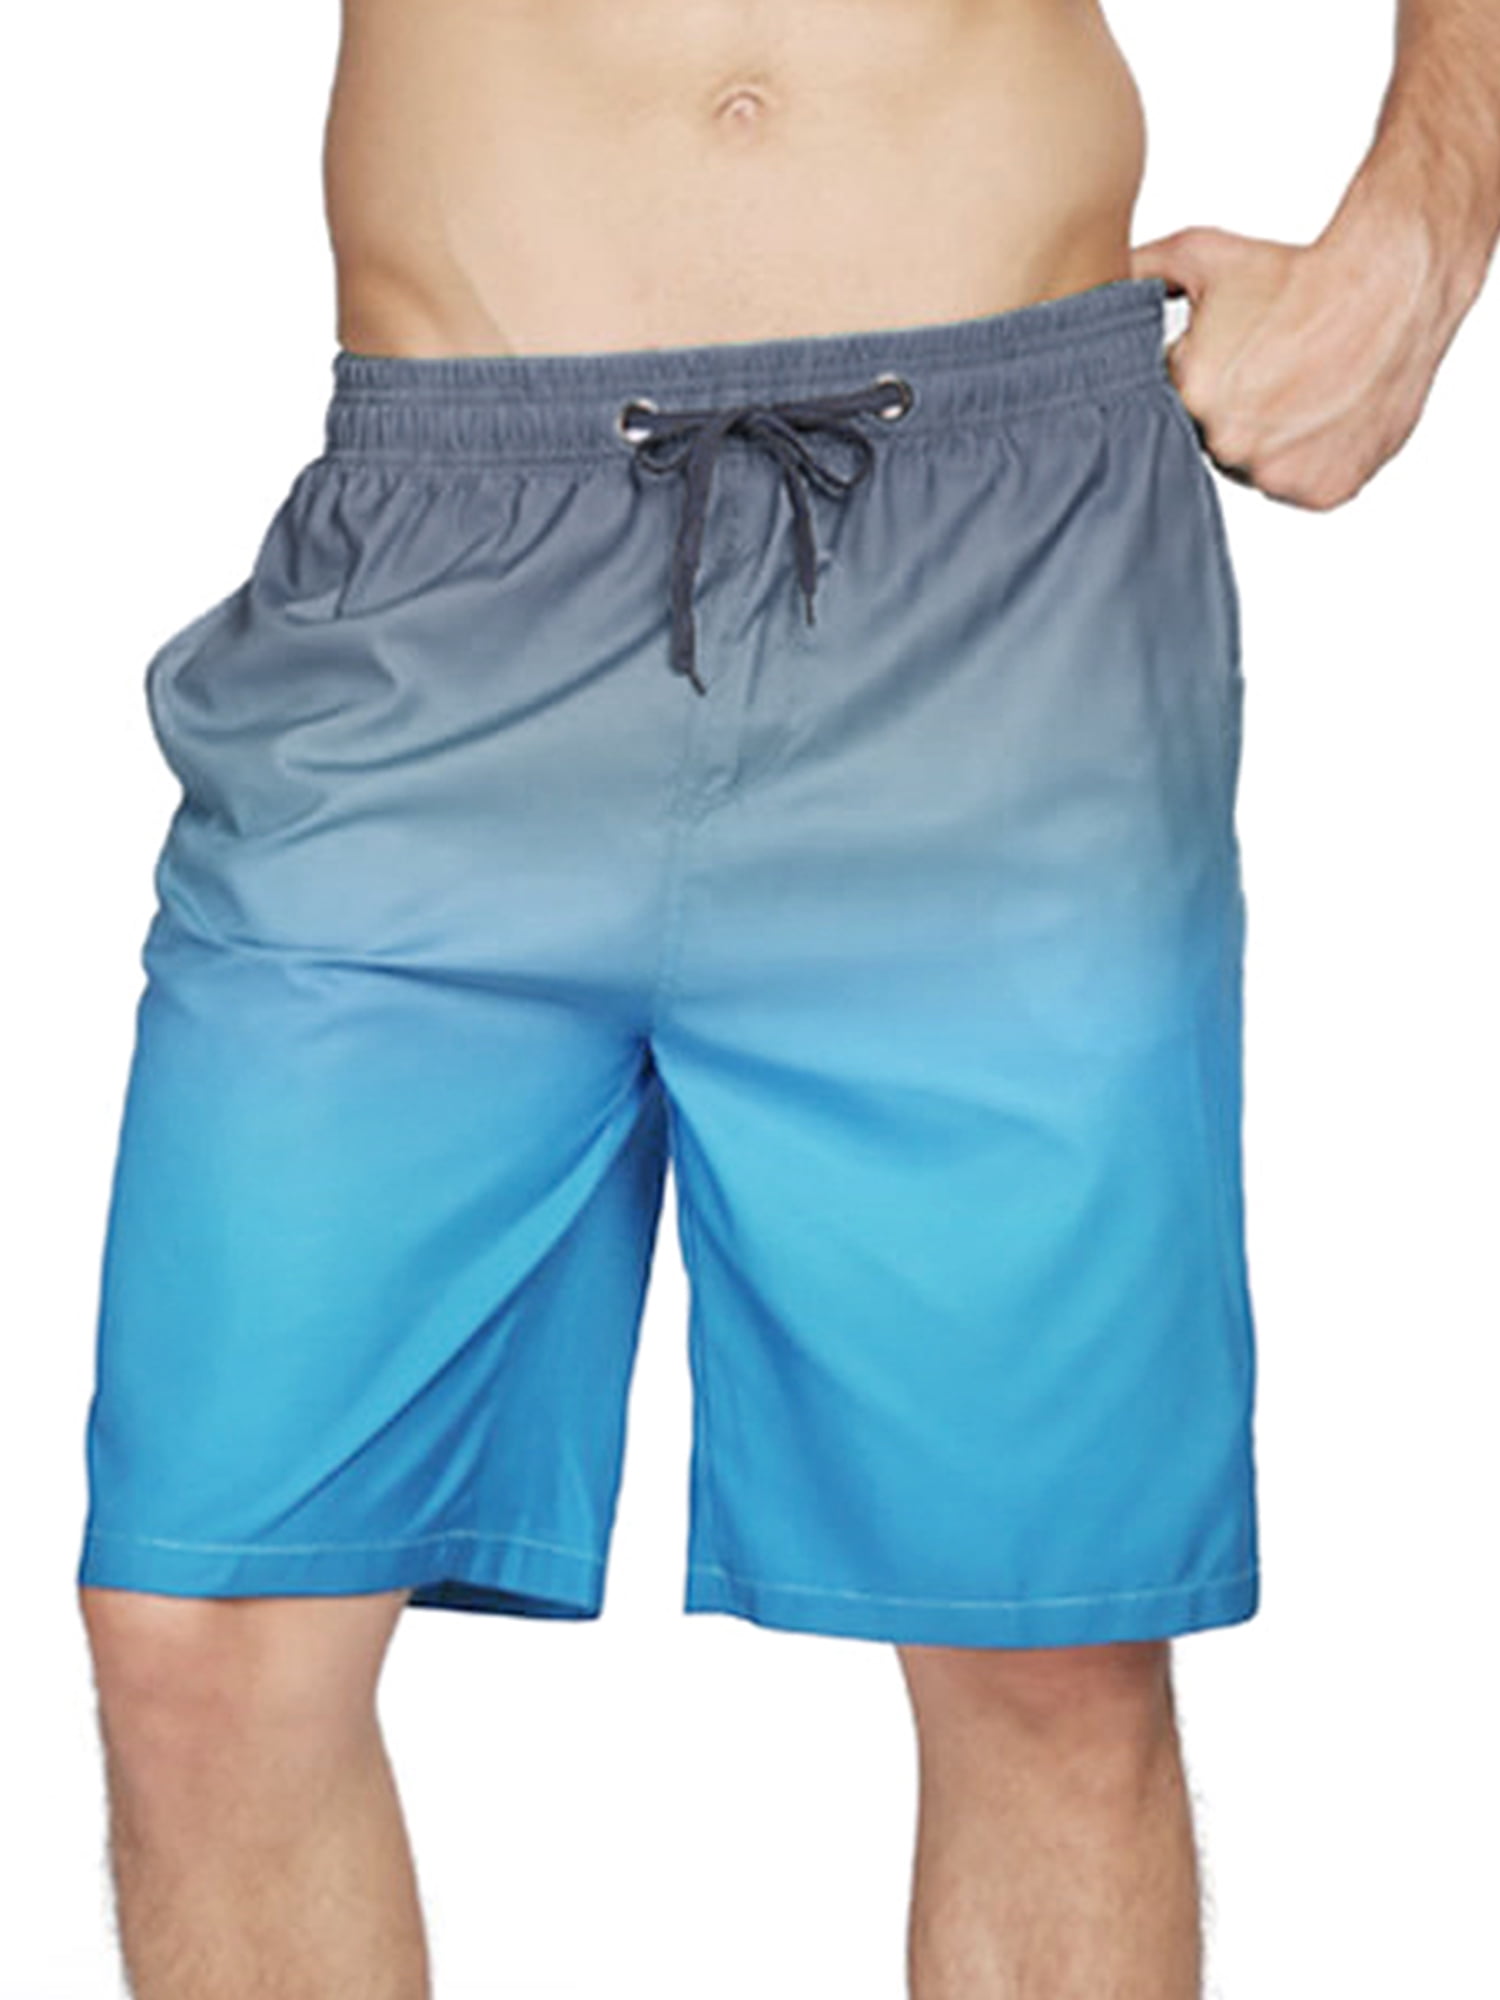 Mens Summer Surf Swim Trunks Beach Shorts Pants Quick Dry with Pockets